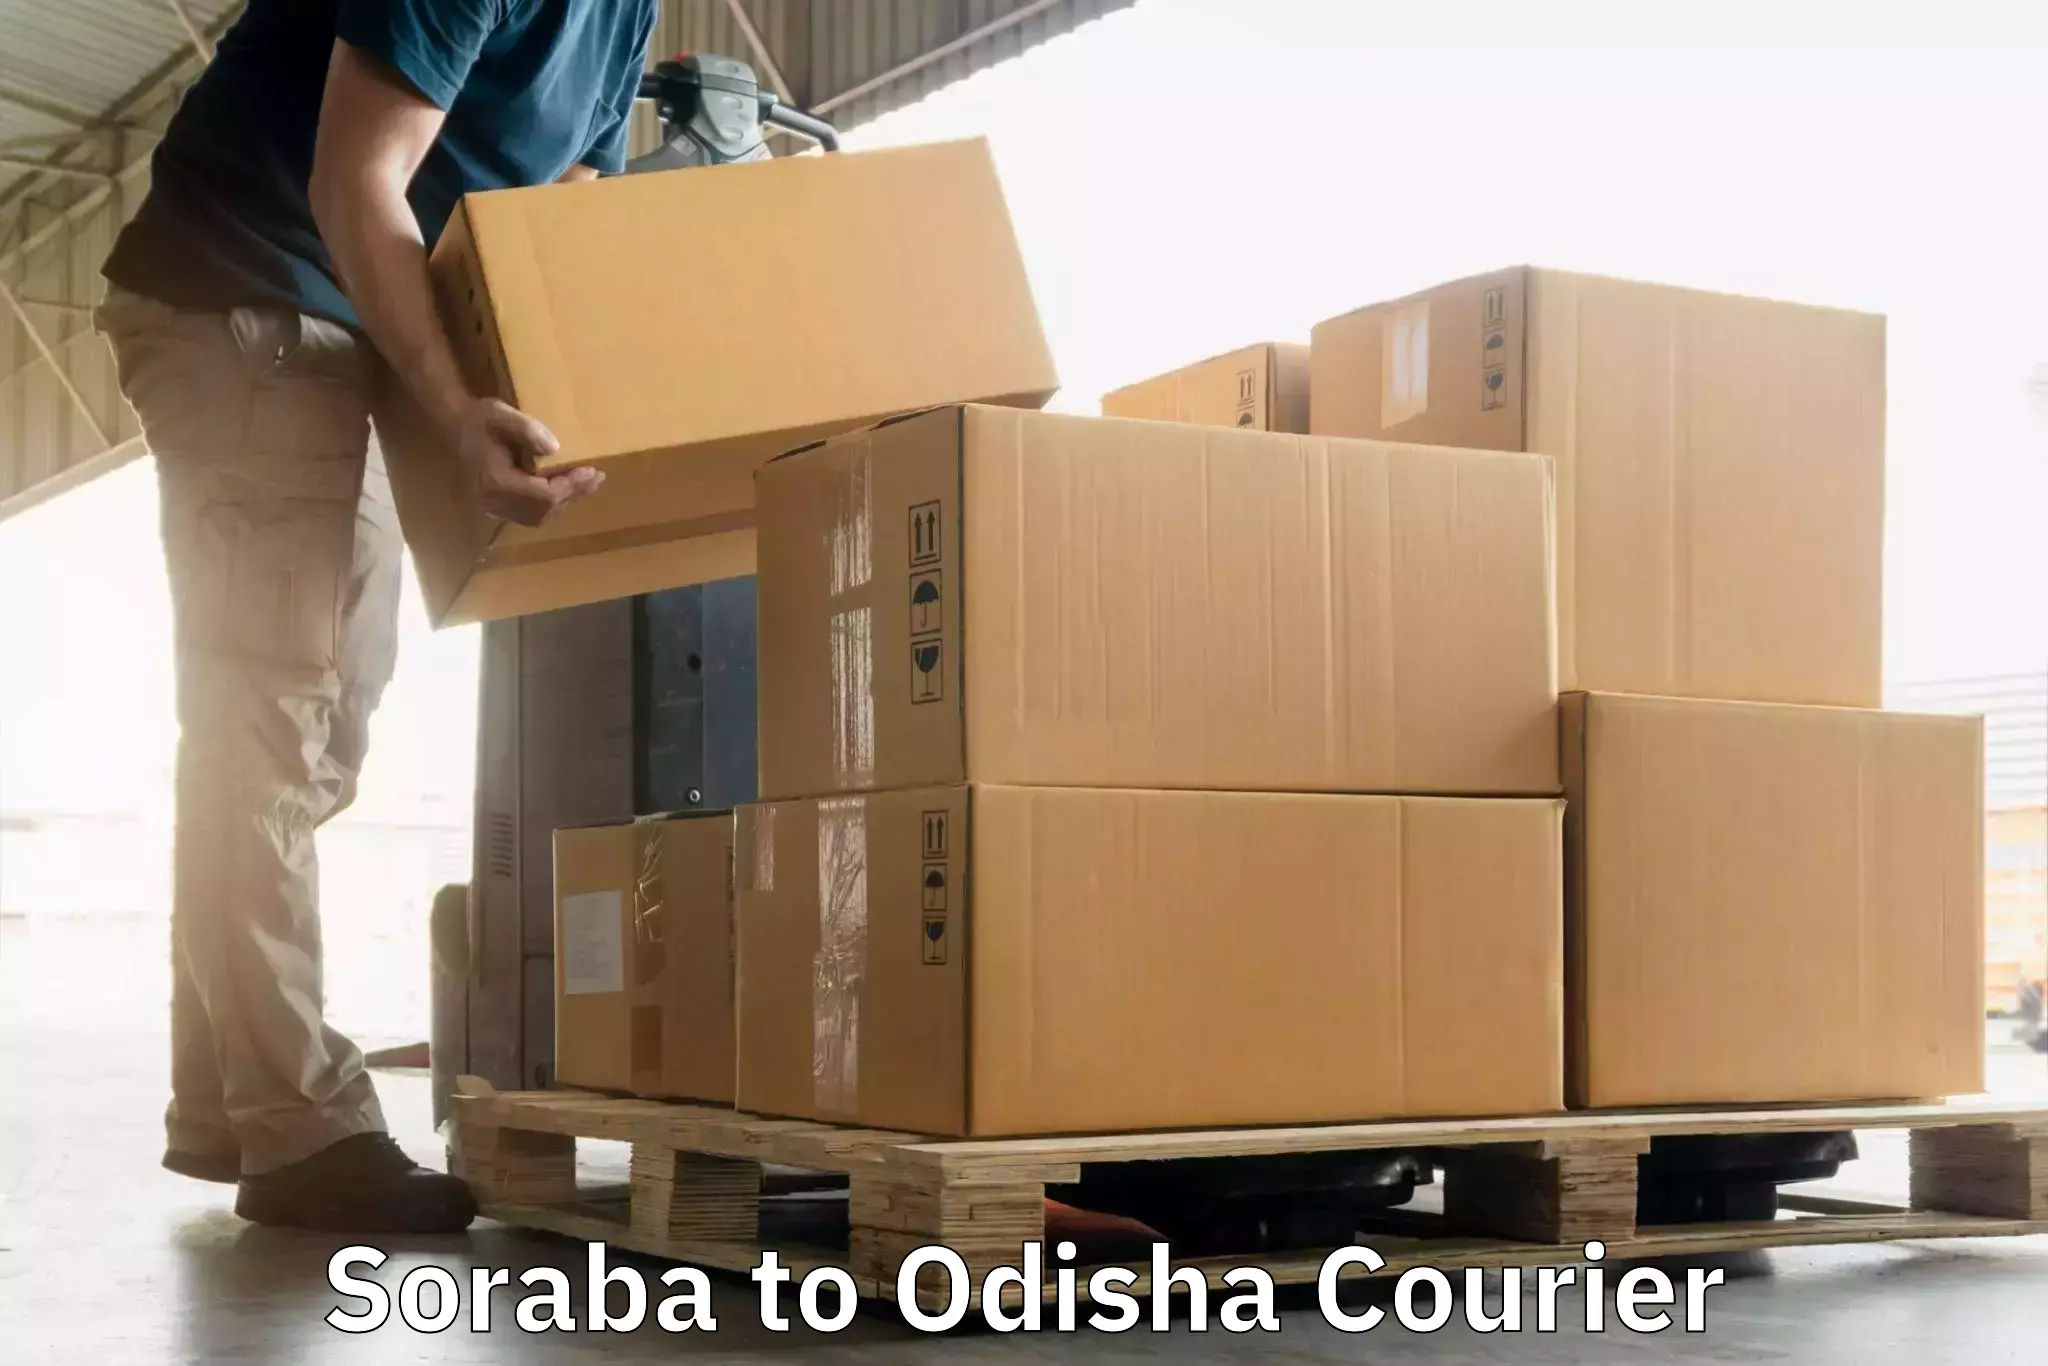 24-hour courier services in Soraba to Odisha